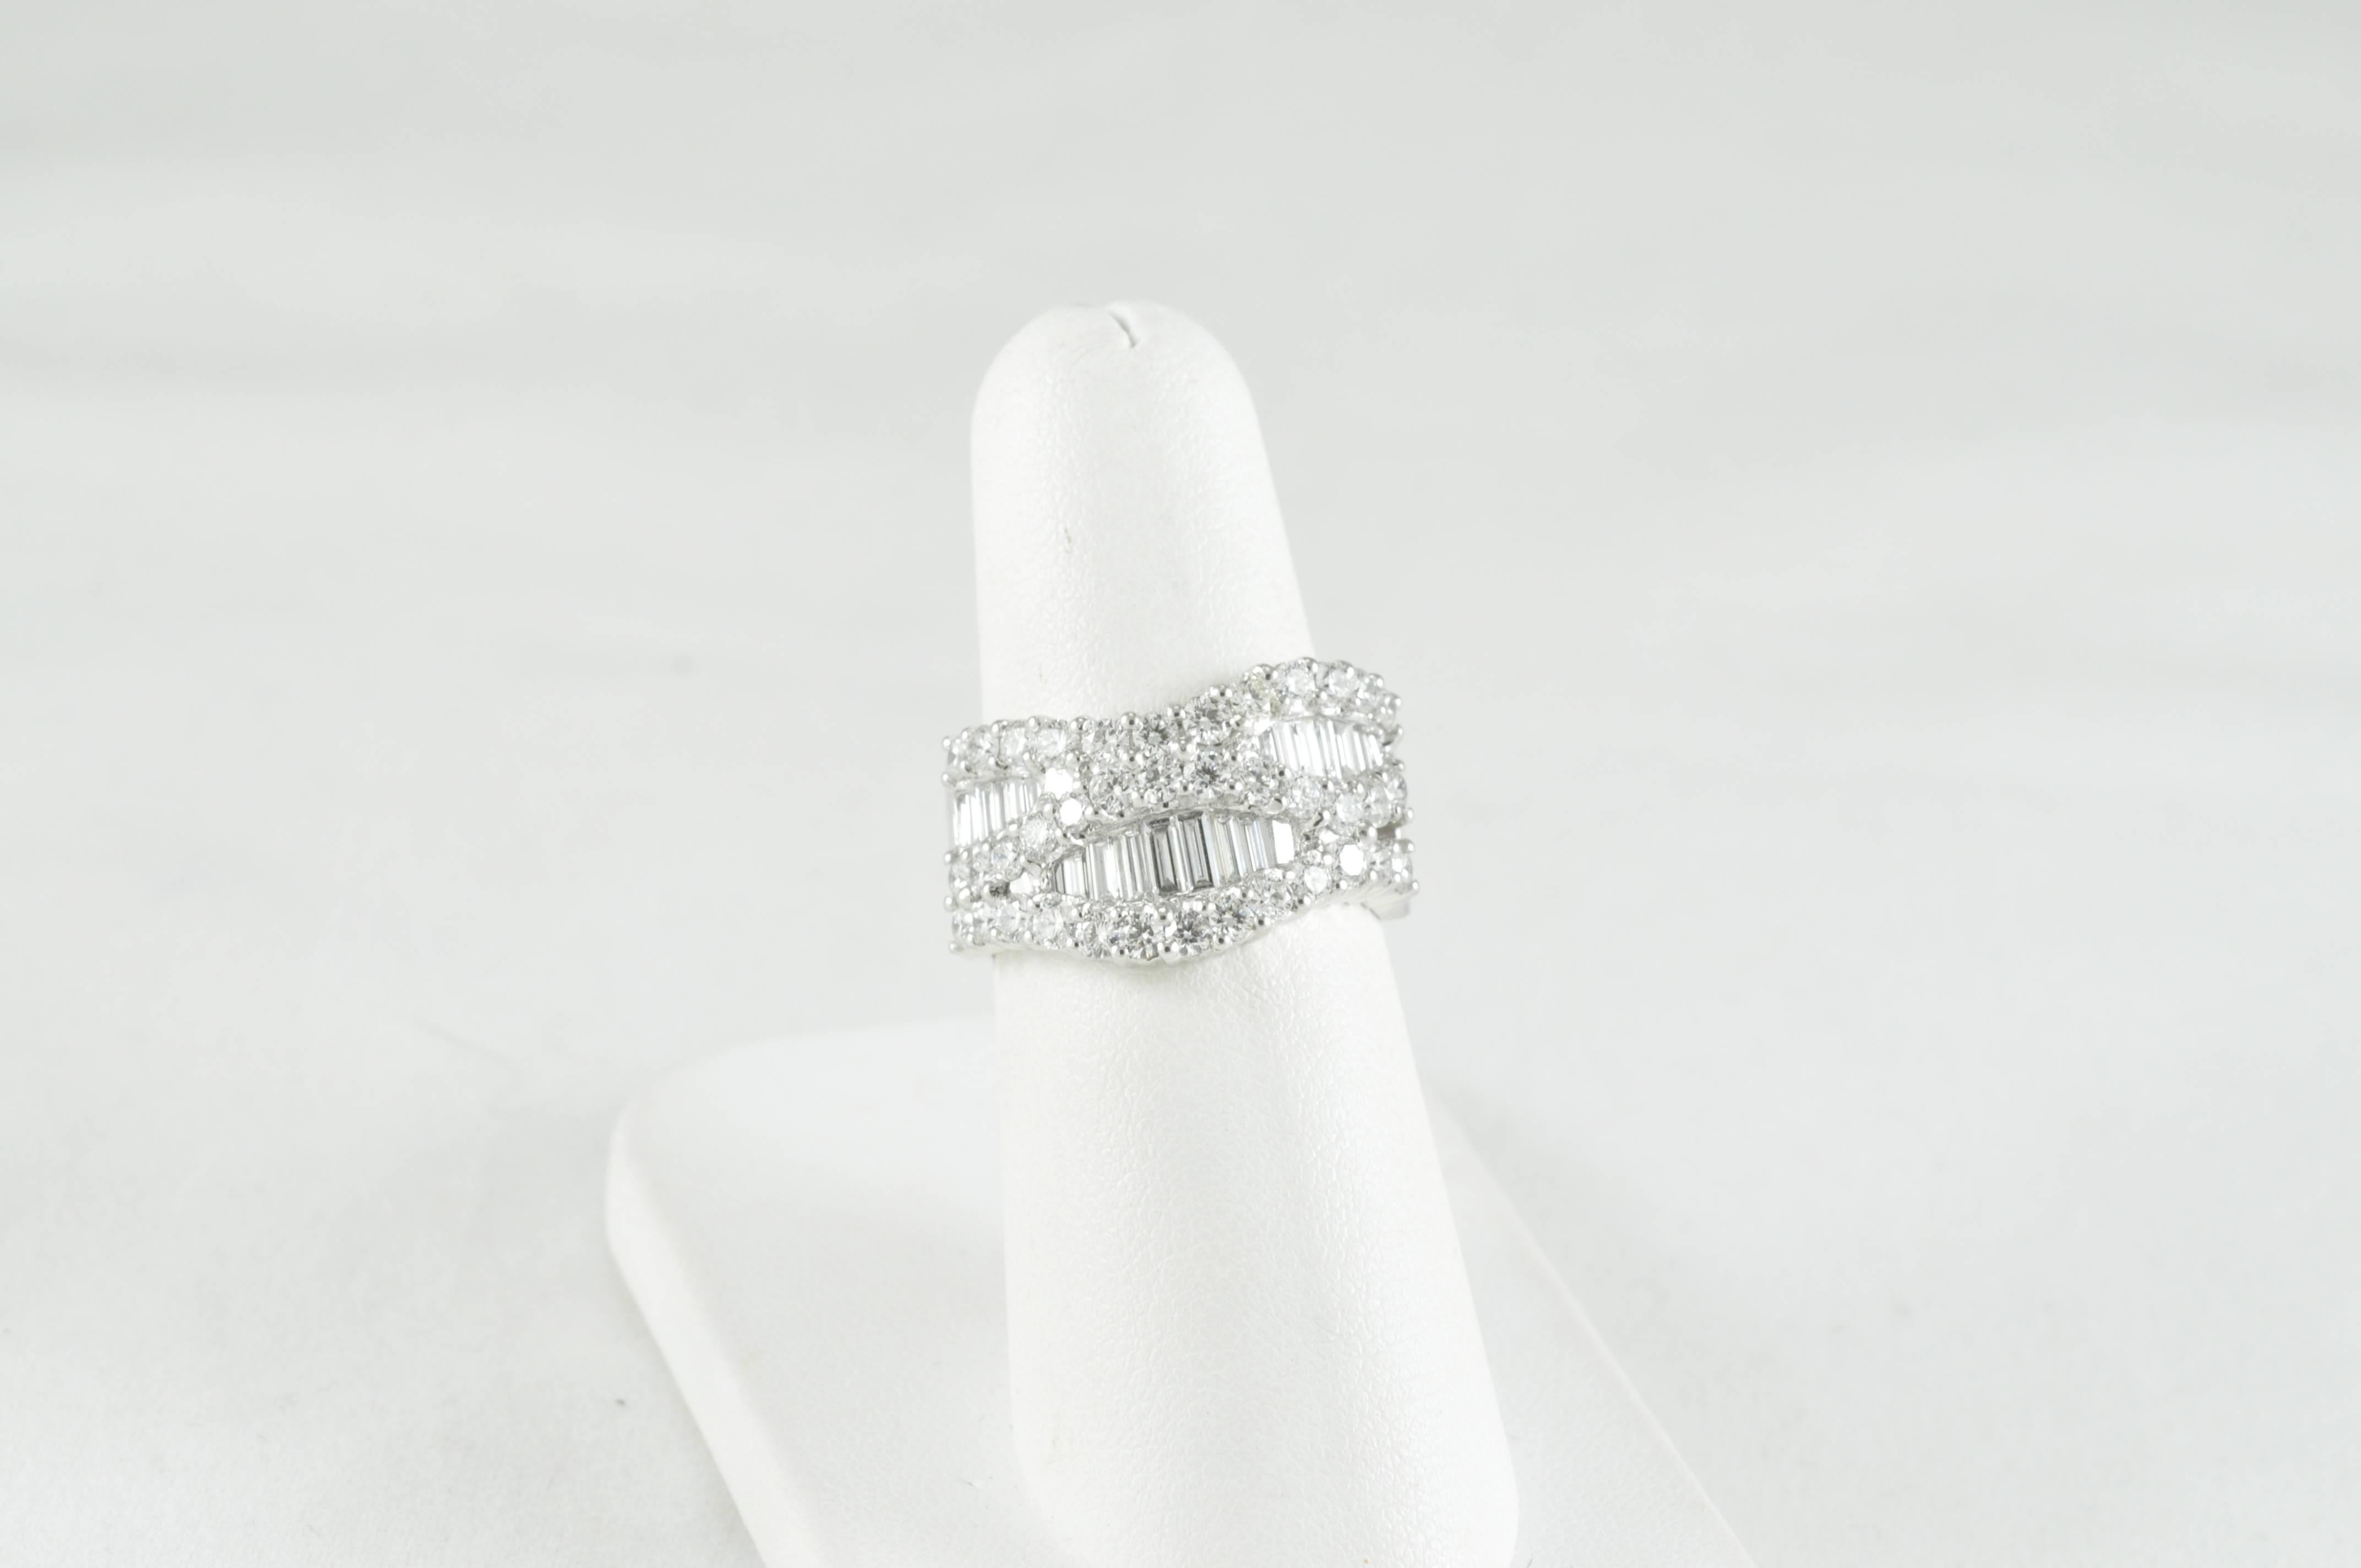 18K White Gold and Palladium.
Finger Size 6 3/4, can be sized. 
1.43 CTW Round Diamonds
.69 CTW Baguettes
Made by Award Winning Designer Jye's.  Very comfortable beautiful ring. 
Diamonds are F-G Color V/S1 Clarity. 